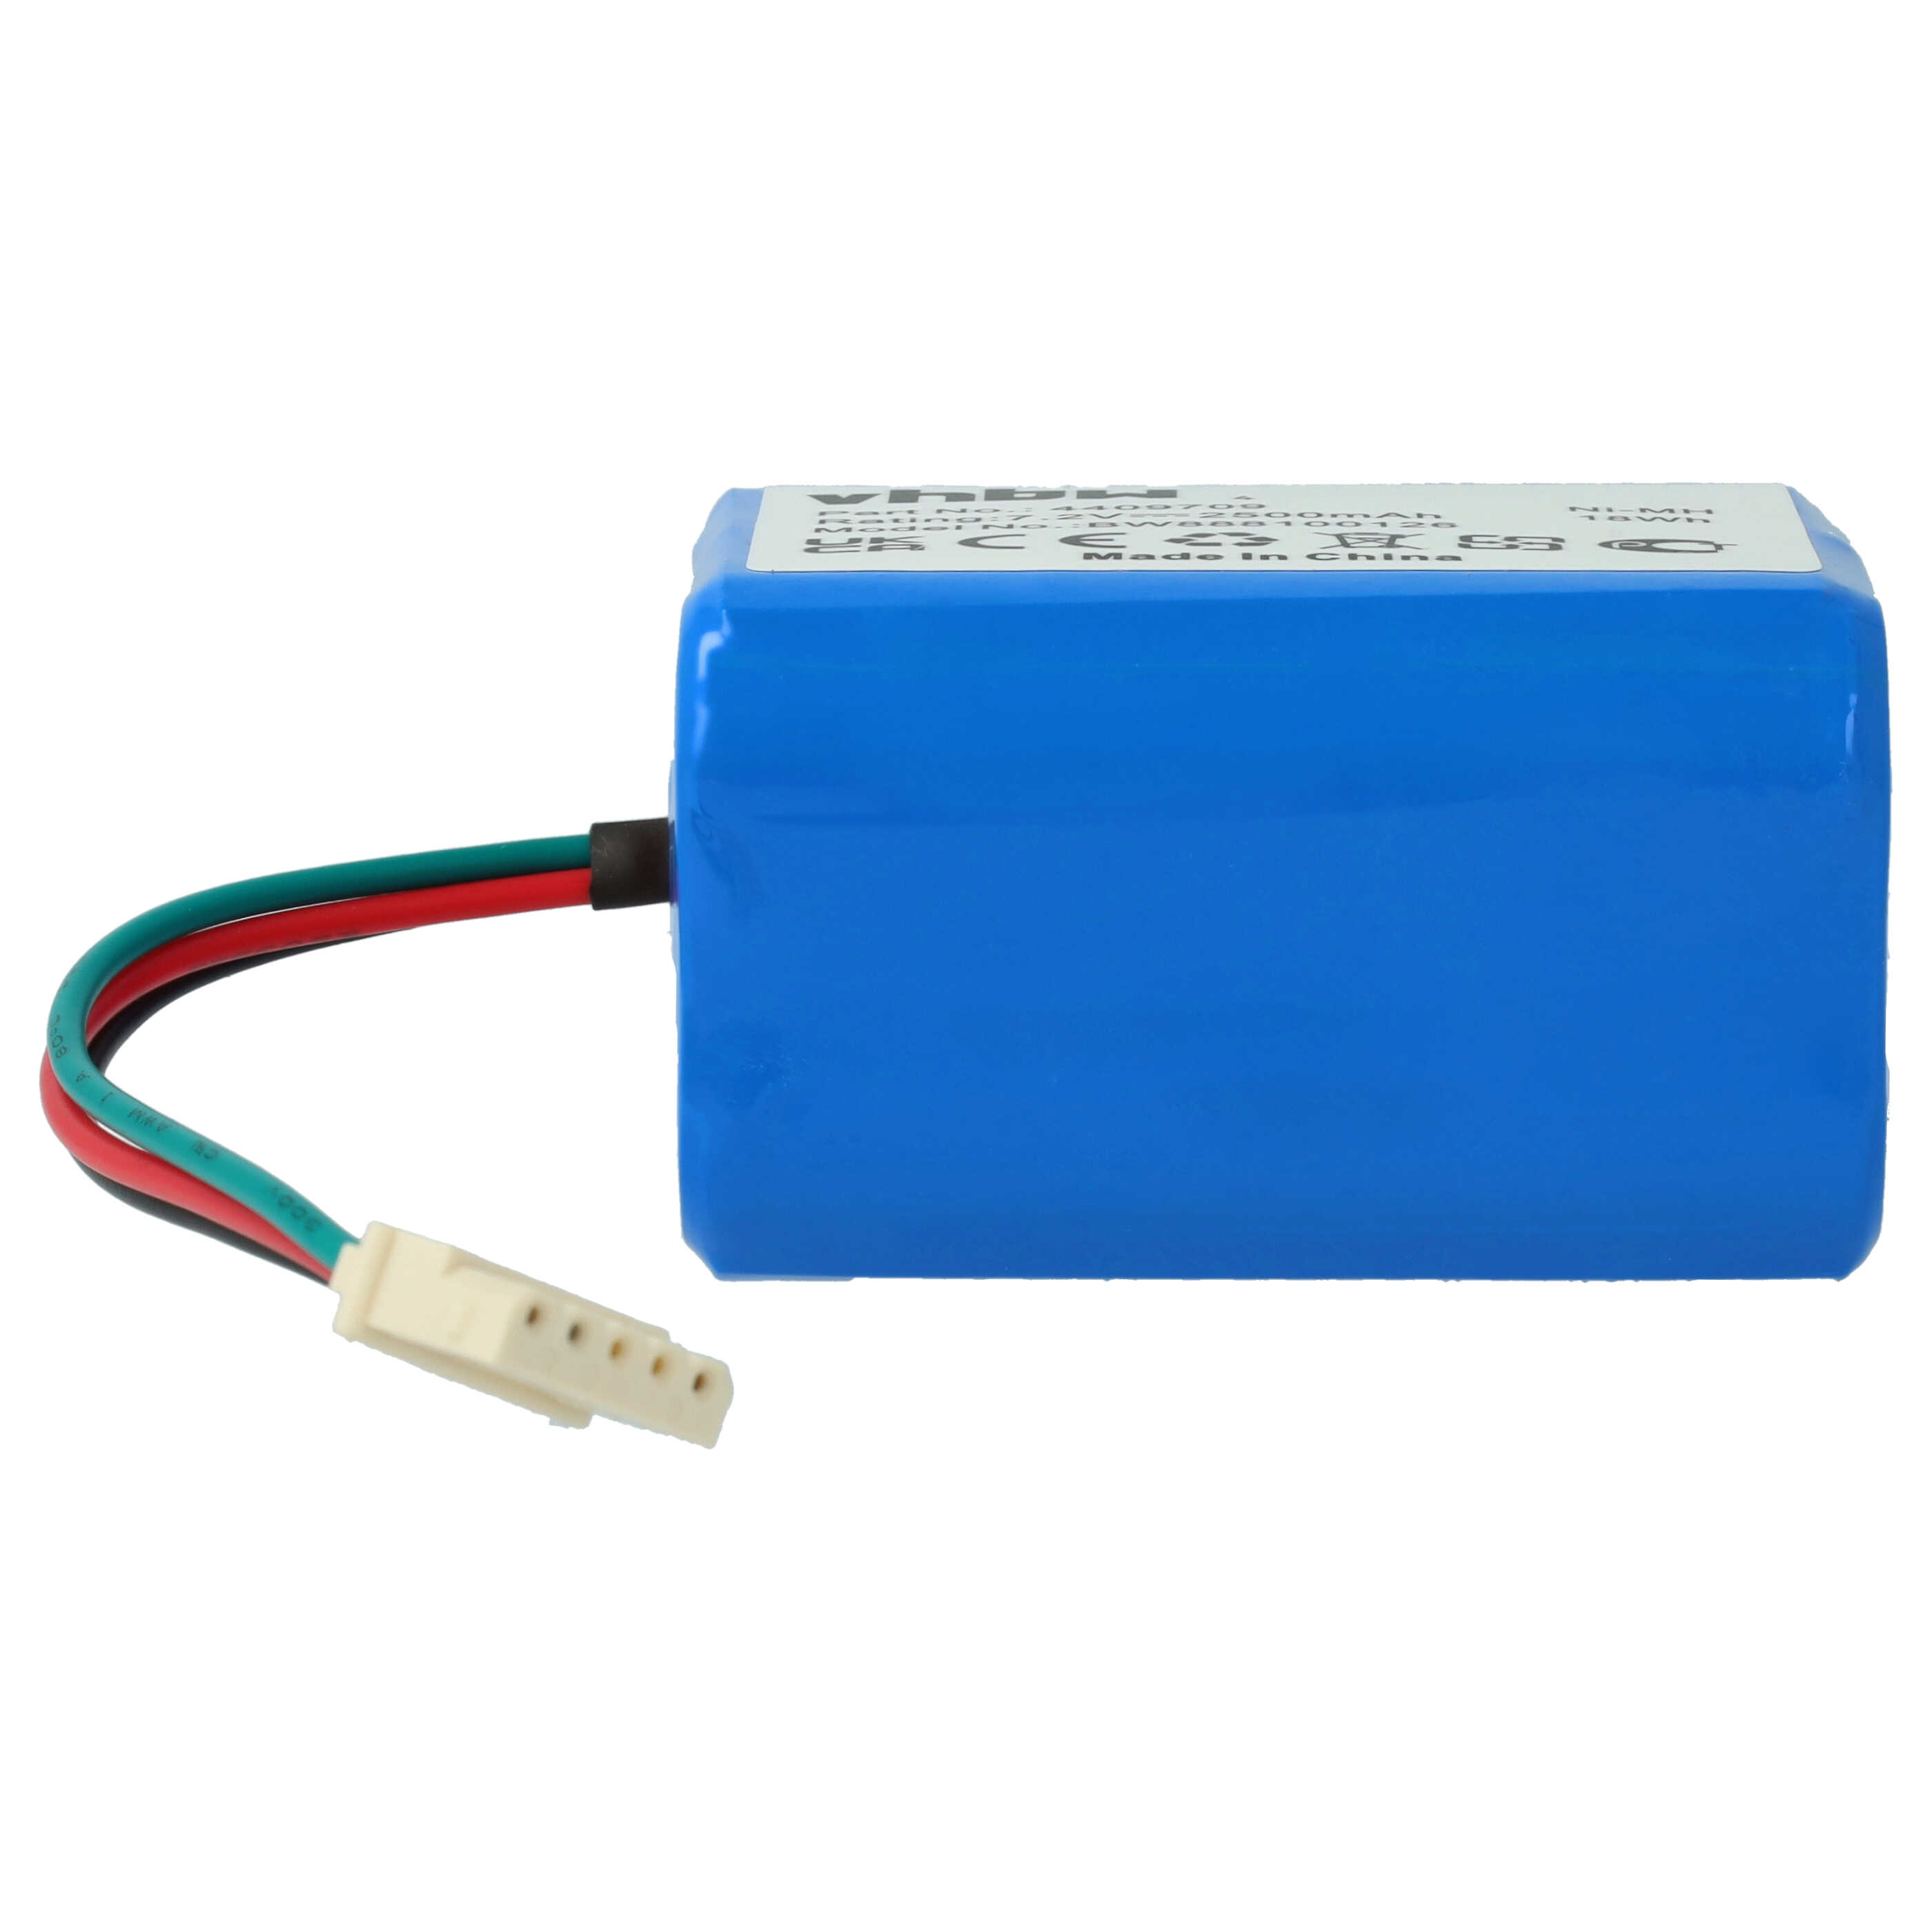 Battery Replacement for iRobot 4409709, GPRHC202N026, W206001001399 for - 2500mAh, 7.2V, NiMH